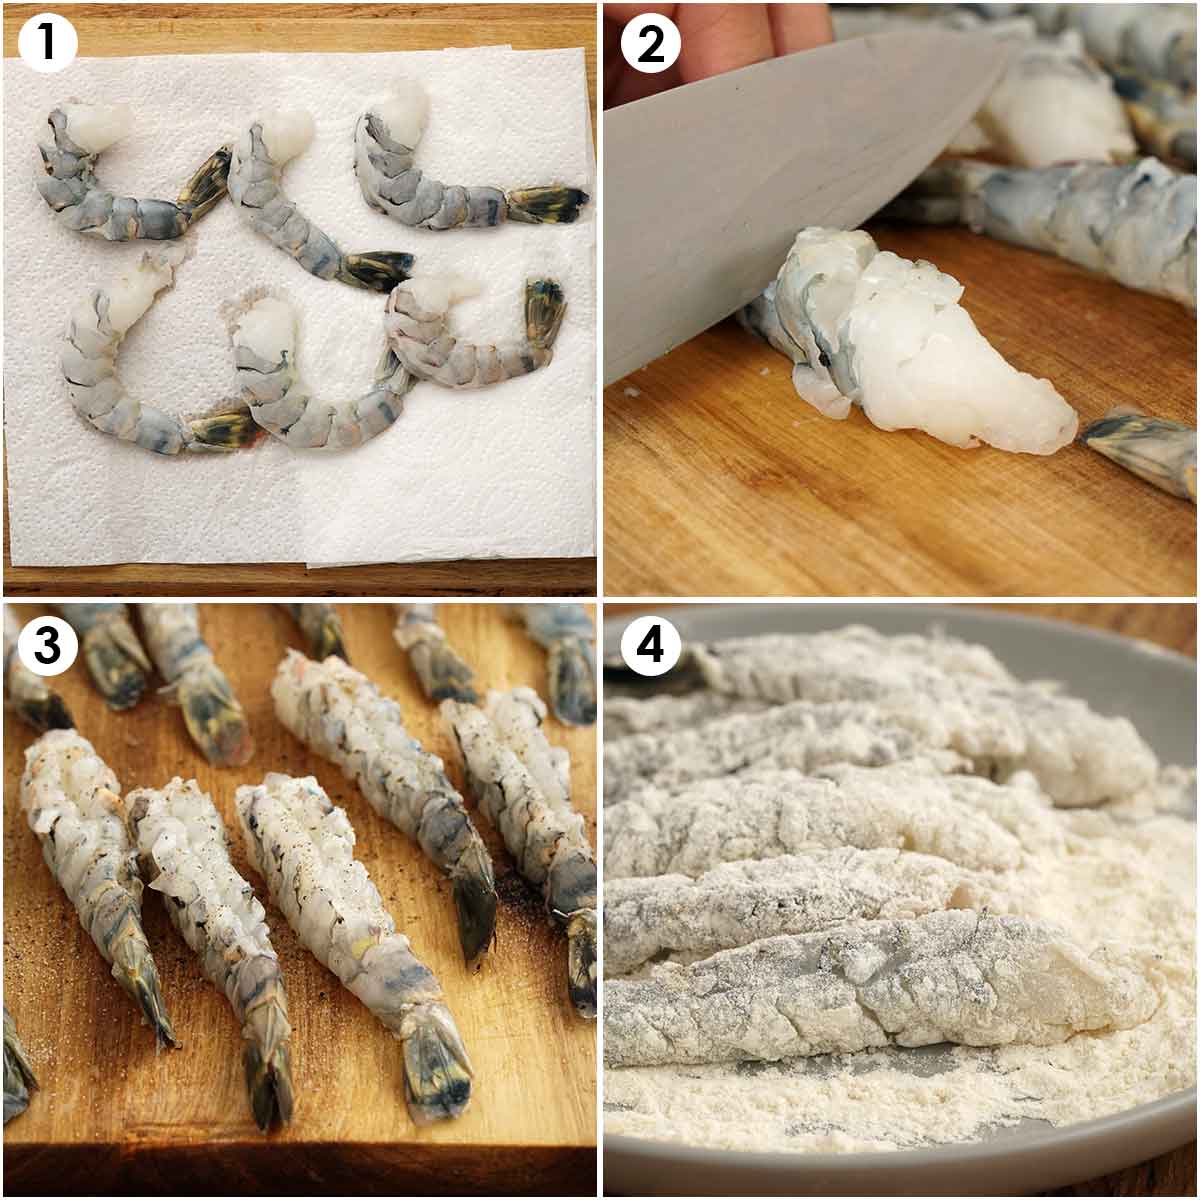 4 image collage showing how to prepare prawns. 